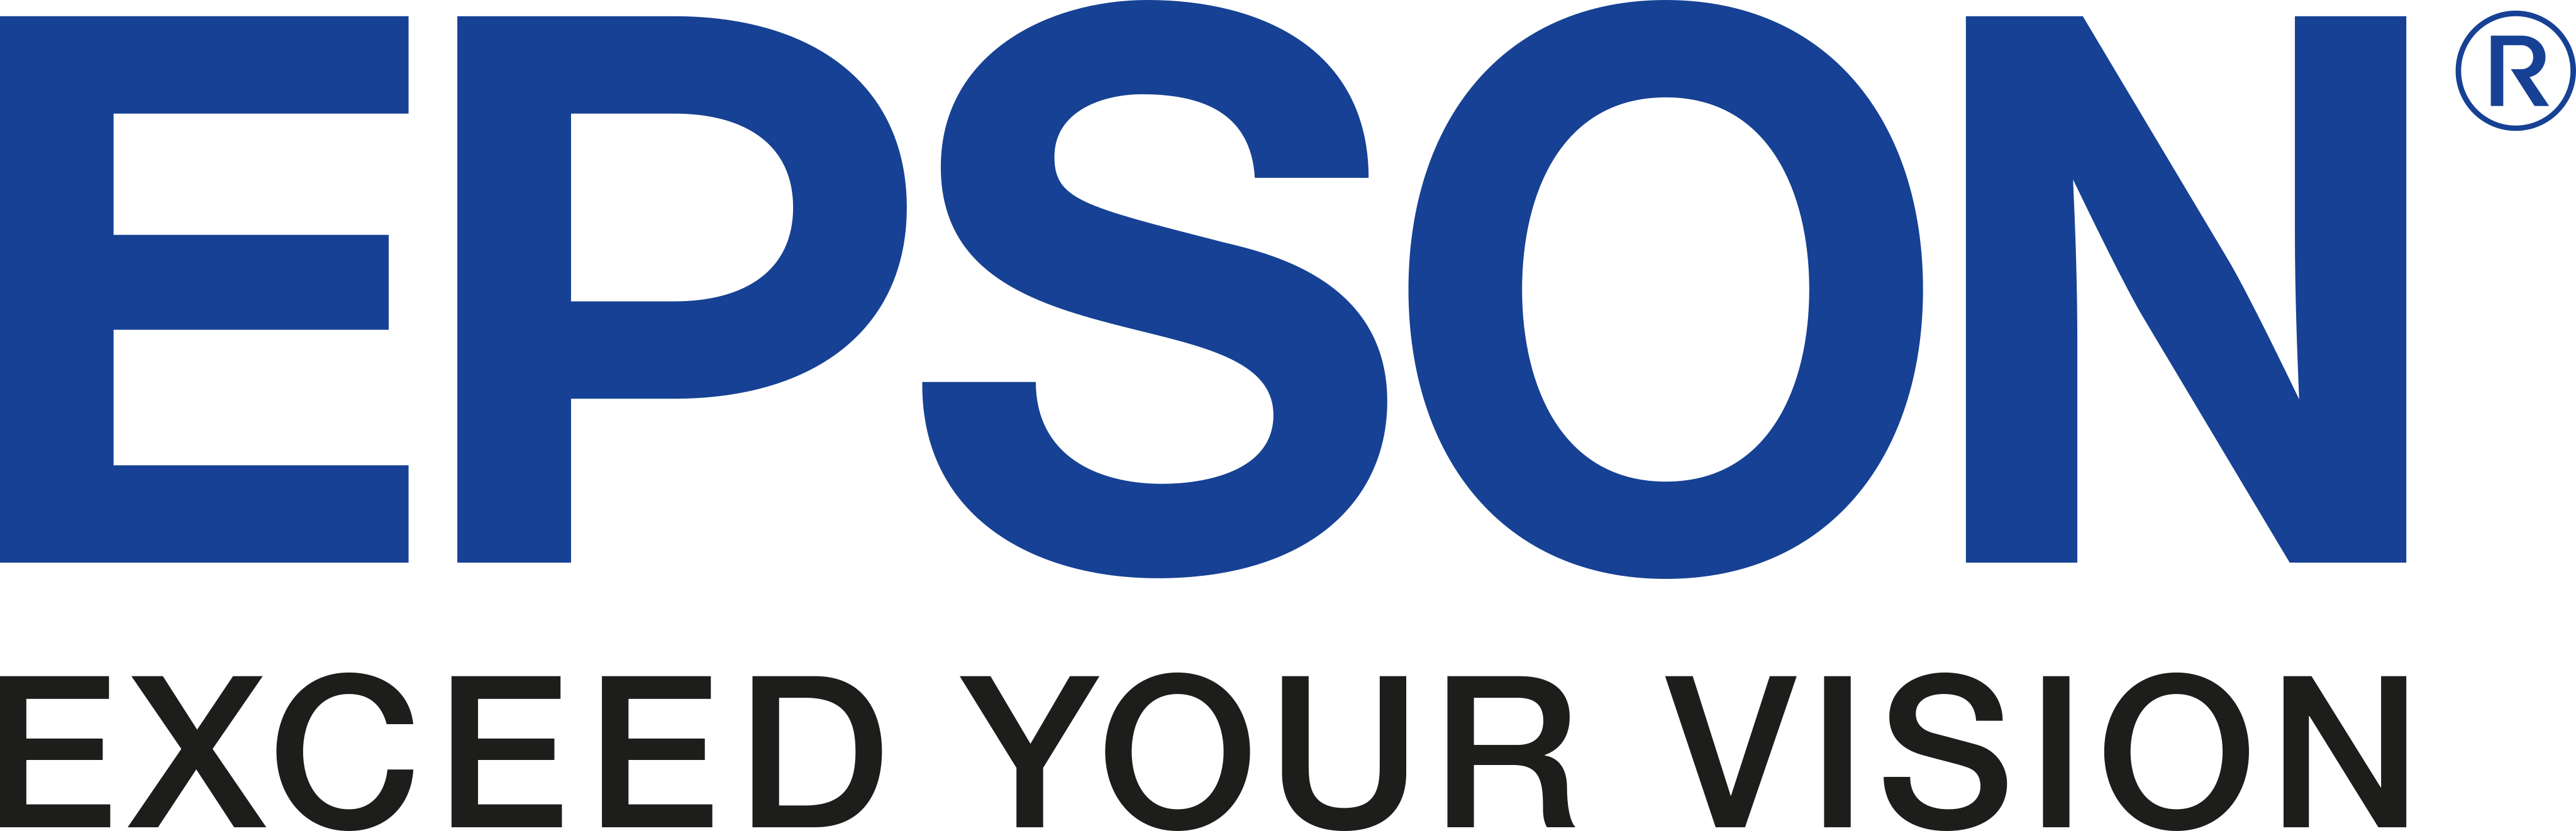 Epson | Brands Of The World